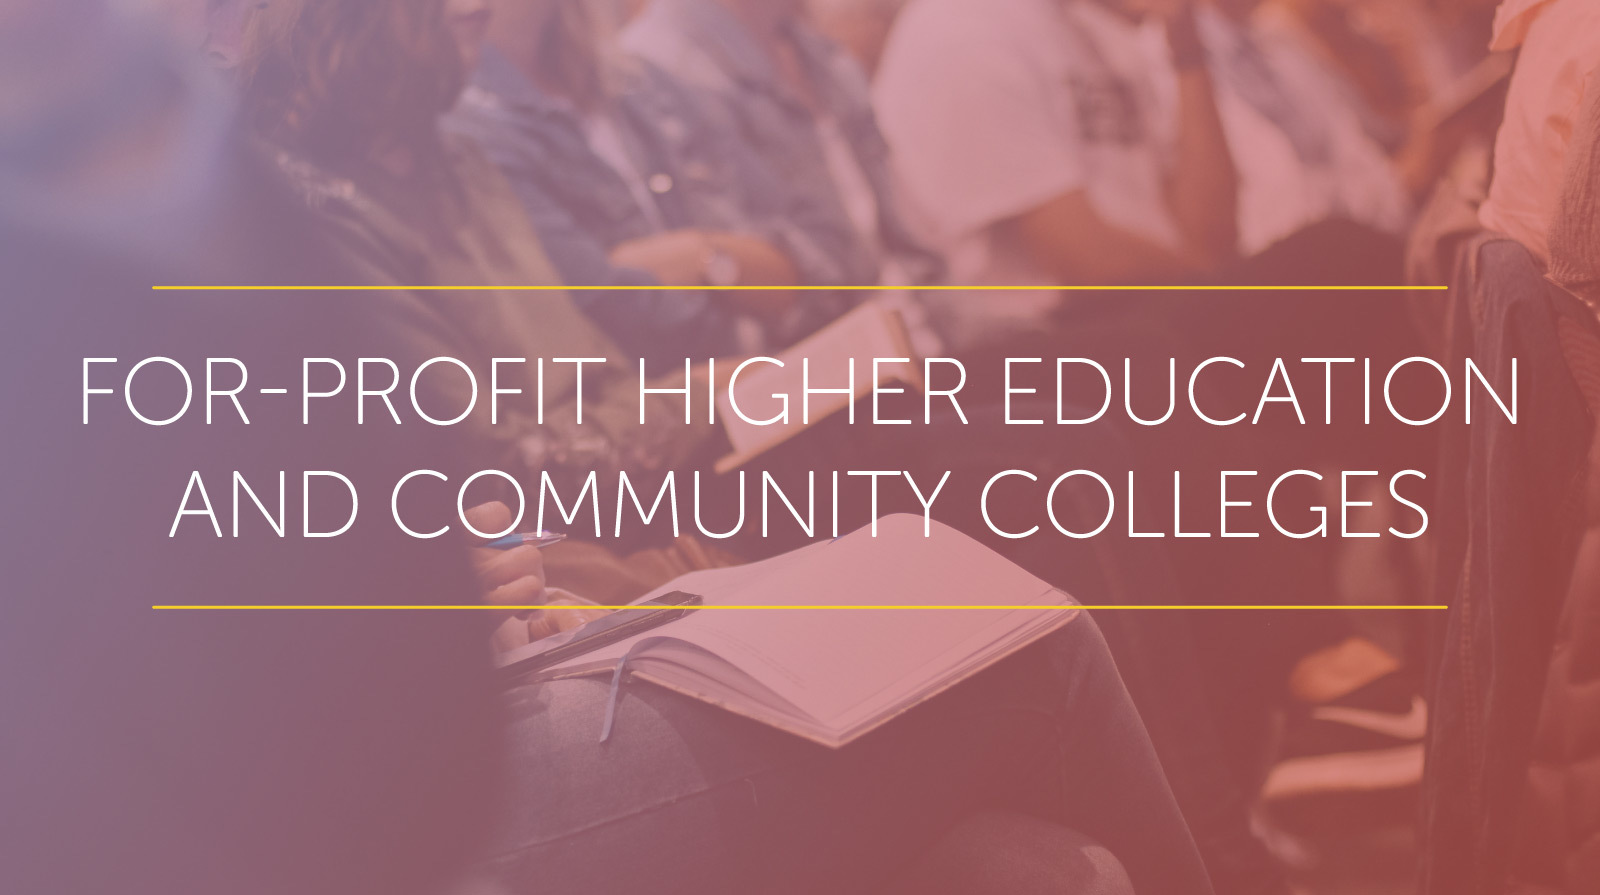 for-profit higher education and community colleges